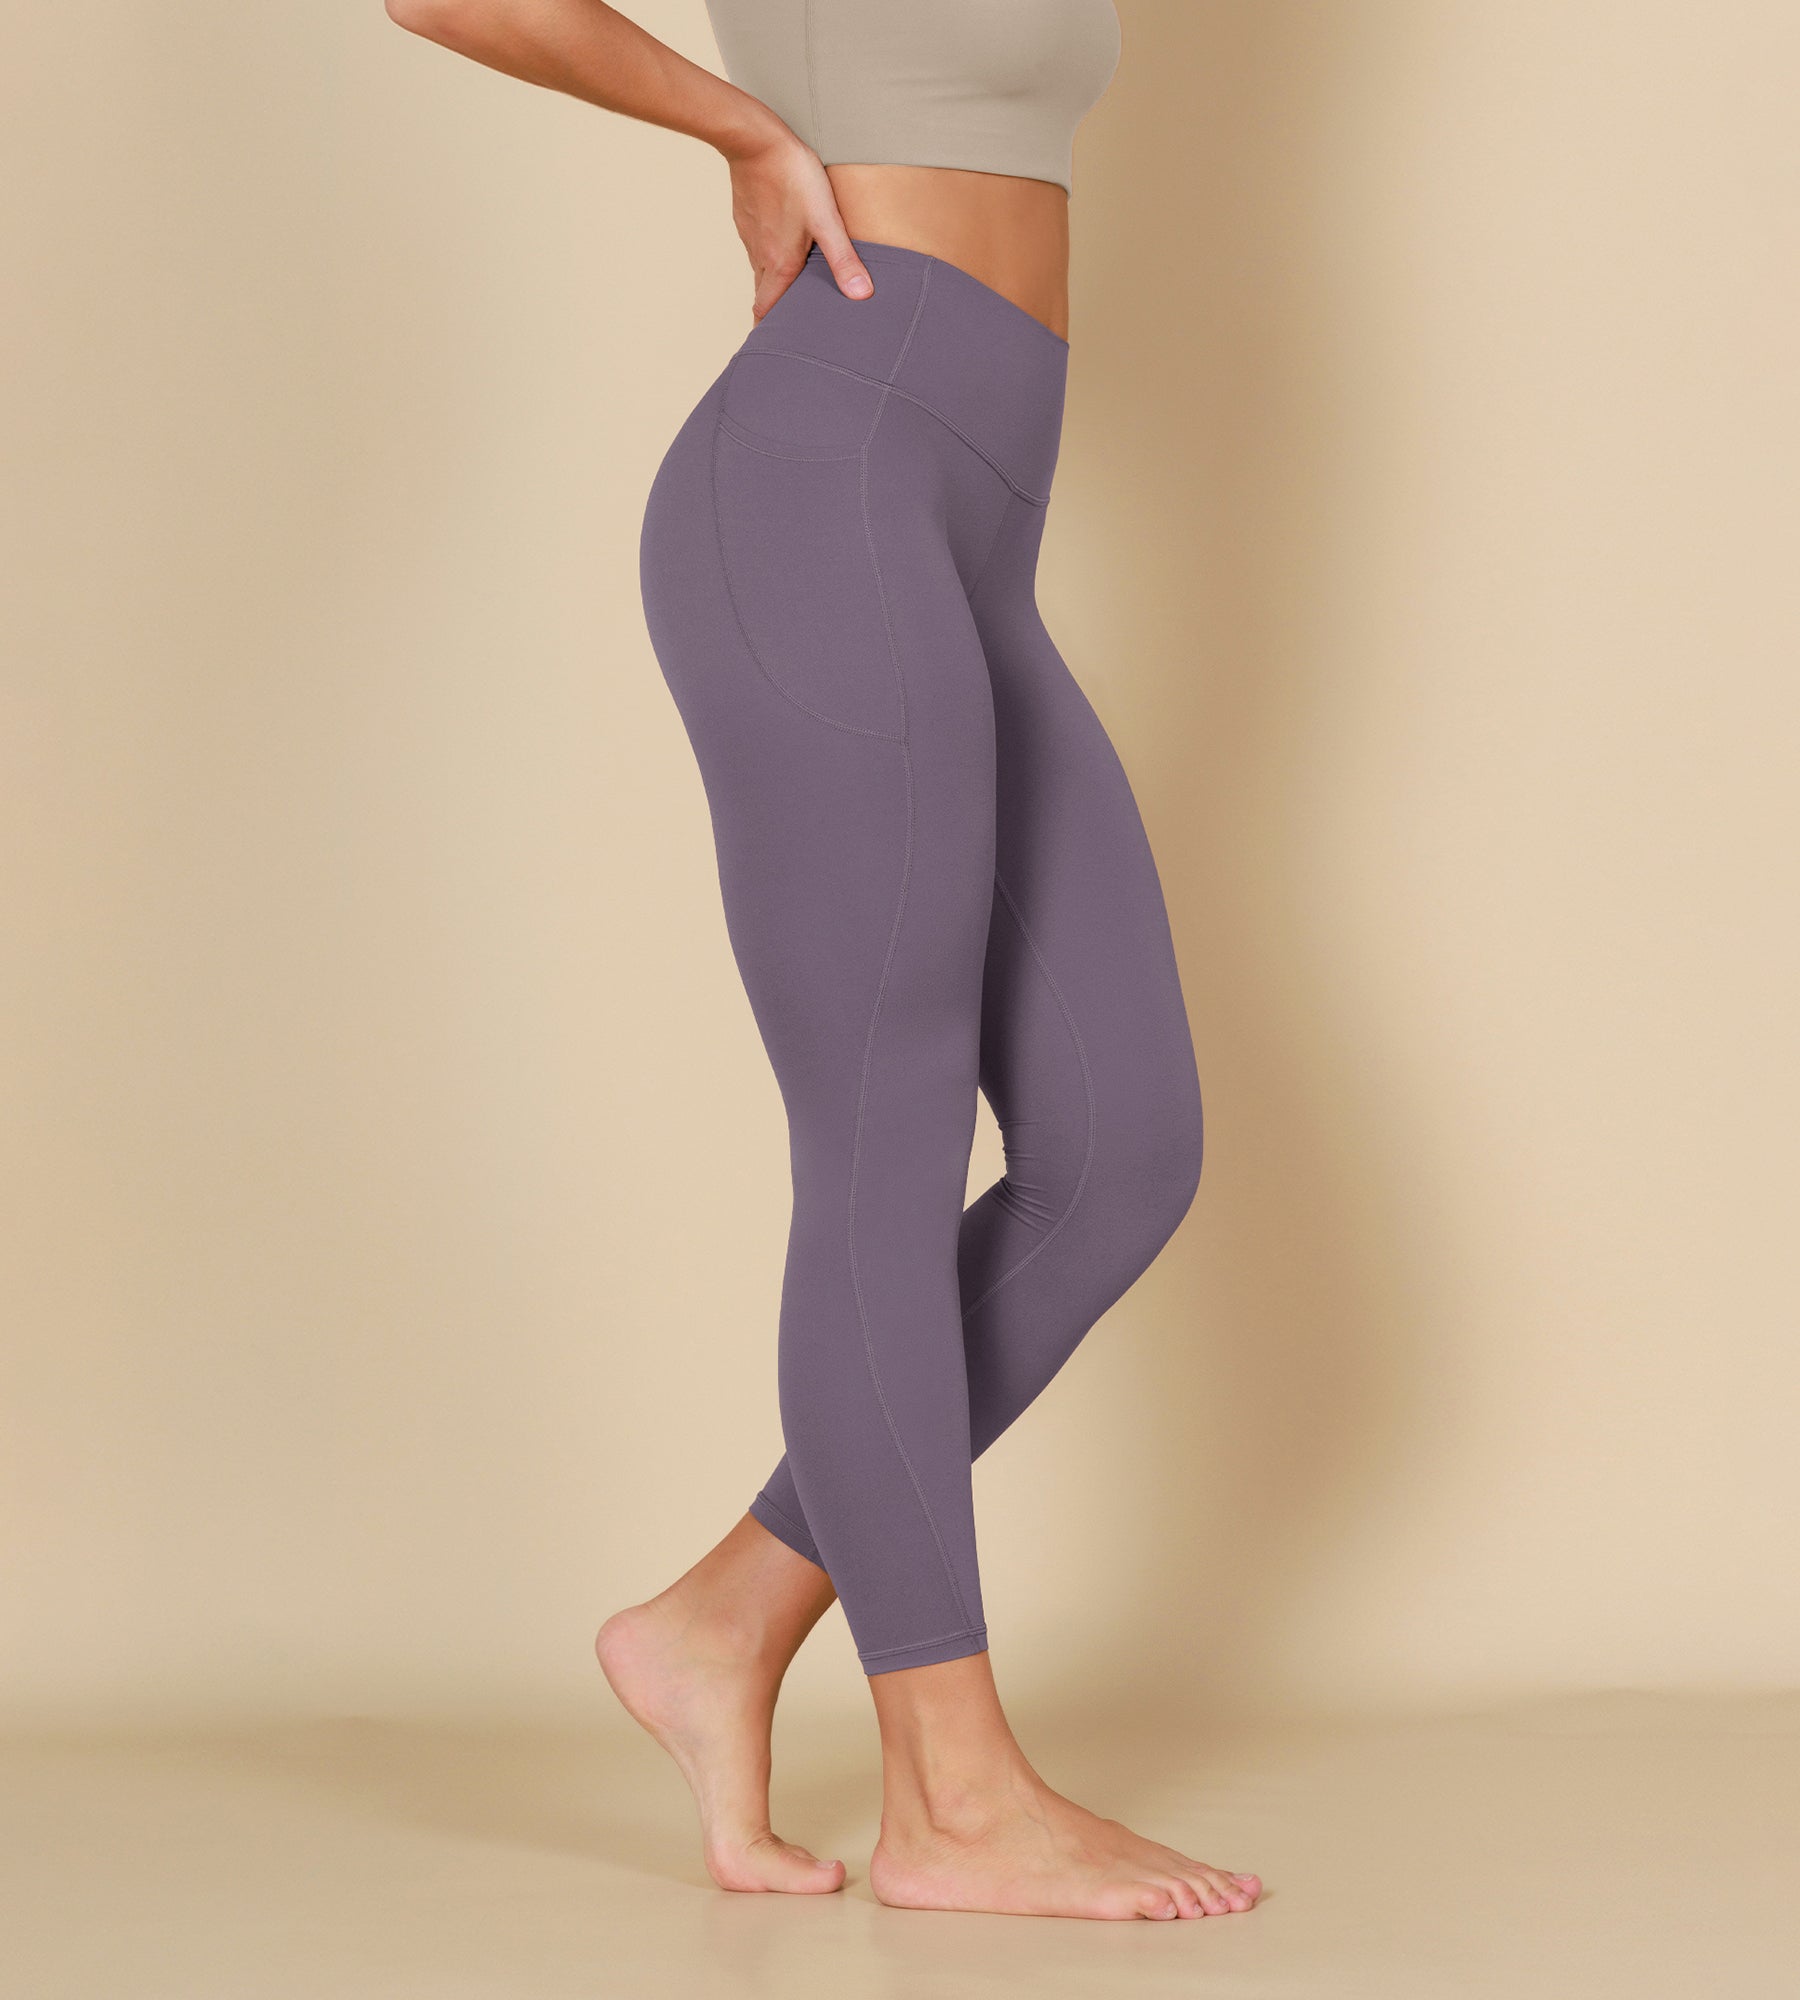 ODCLOUD 2-Pack 7/8 Buttery Soft Lounge Yoga Leggings with Pockets - ododos